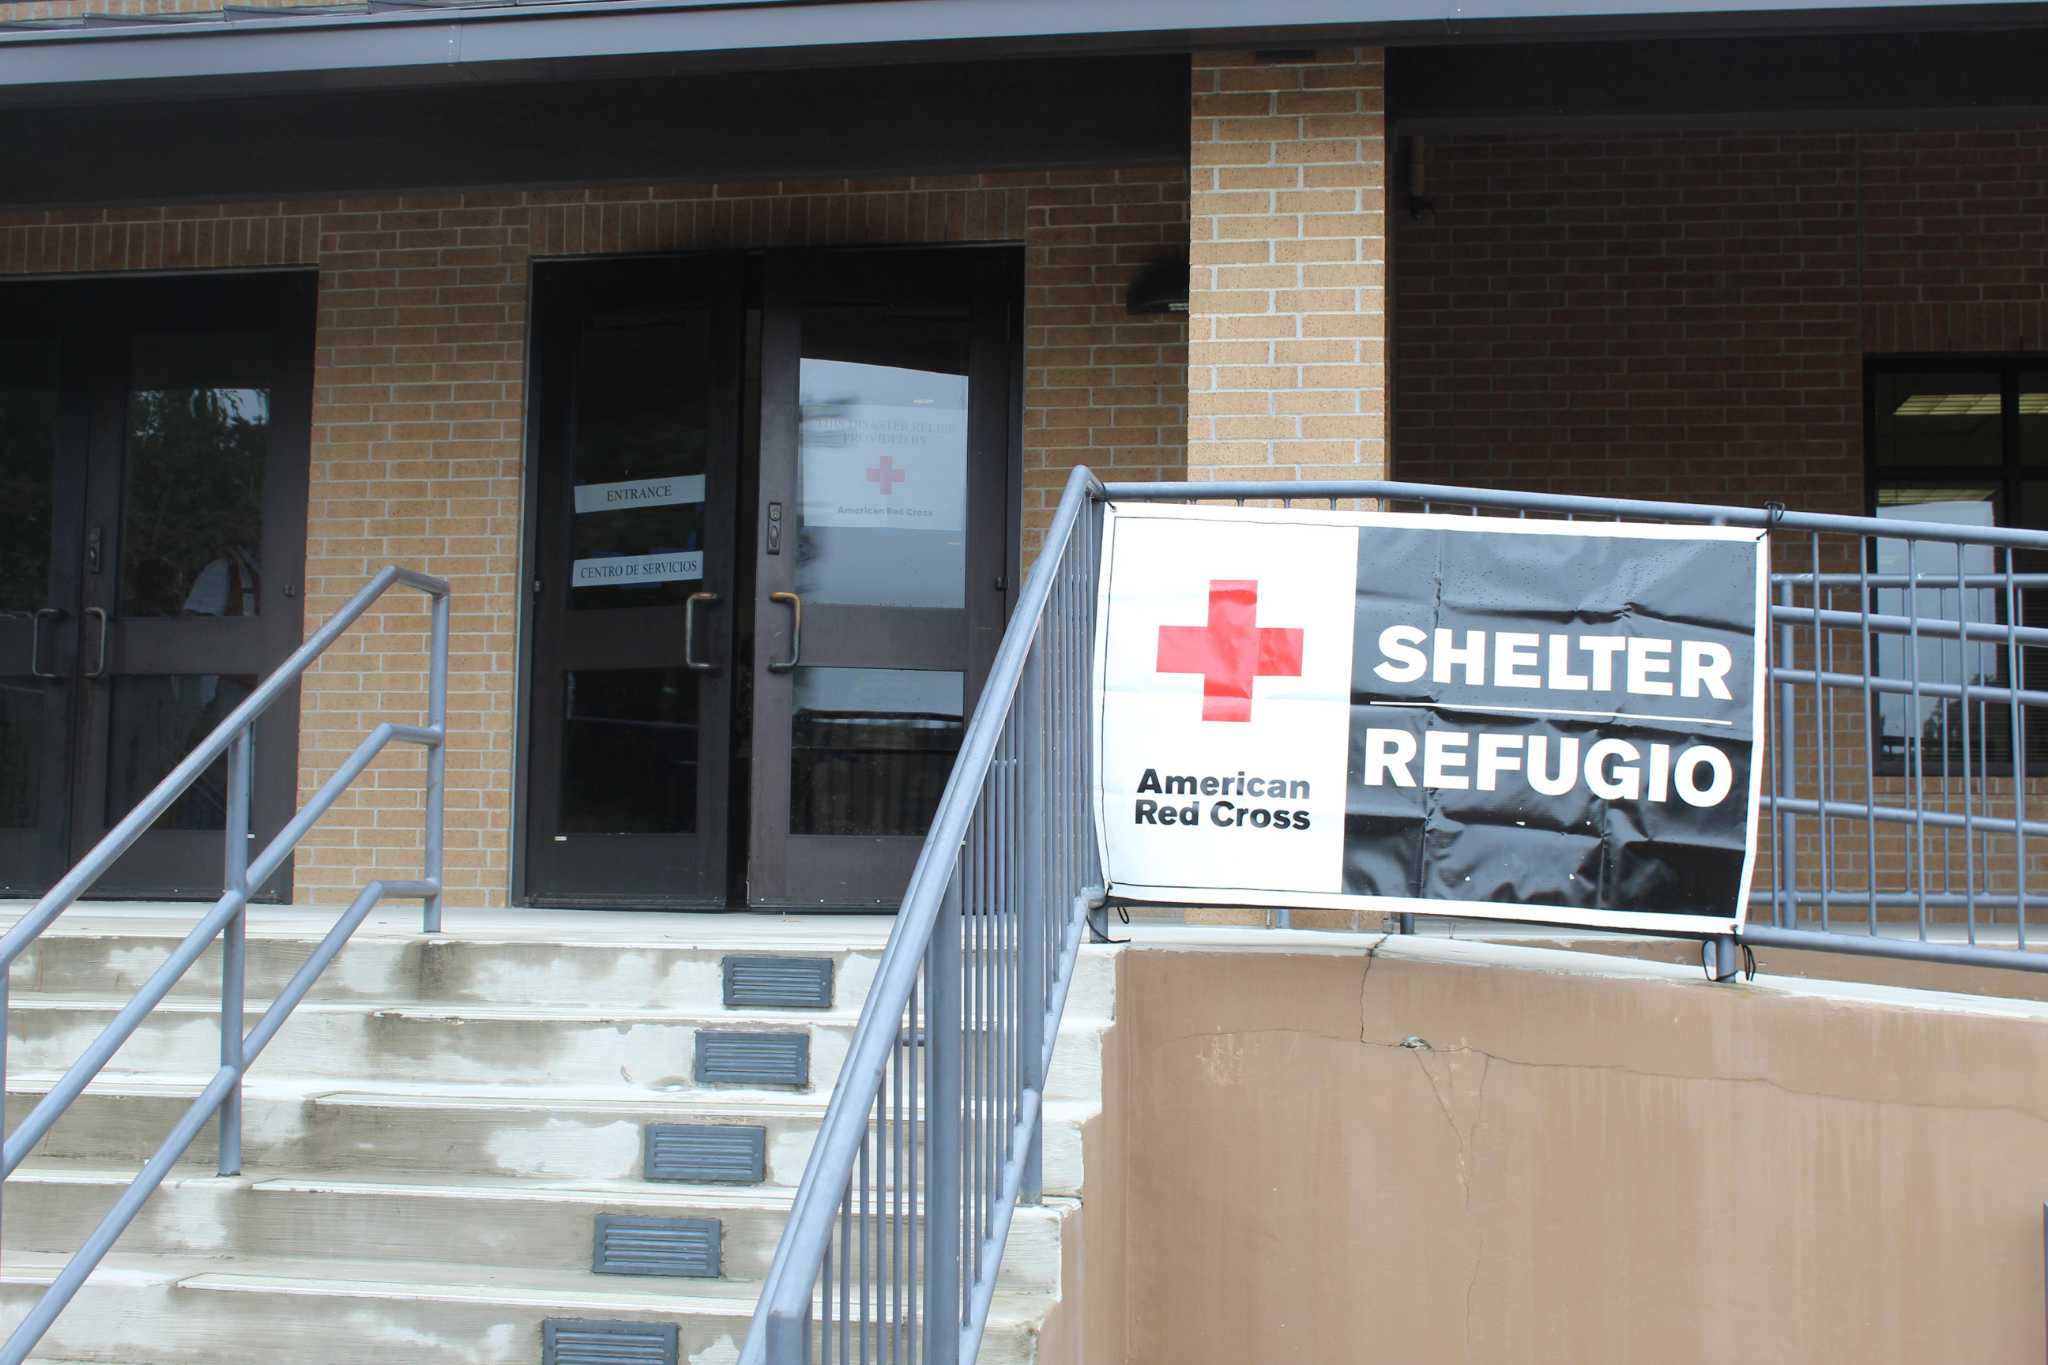 A Red Cross shelter at Sts. Simon & Jude Catholic Parish in The Woodlands, located at 26777 Glen Loch Road, is open 24-hours and can host 150 evacuees.